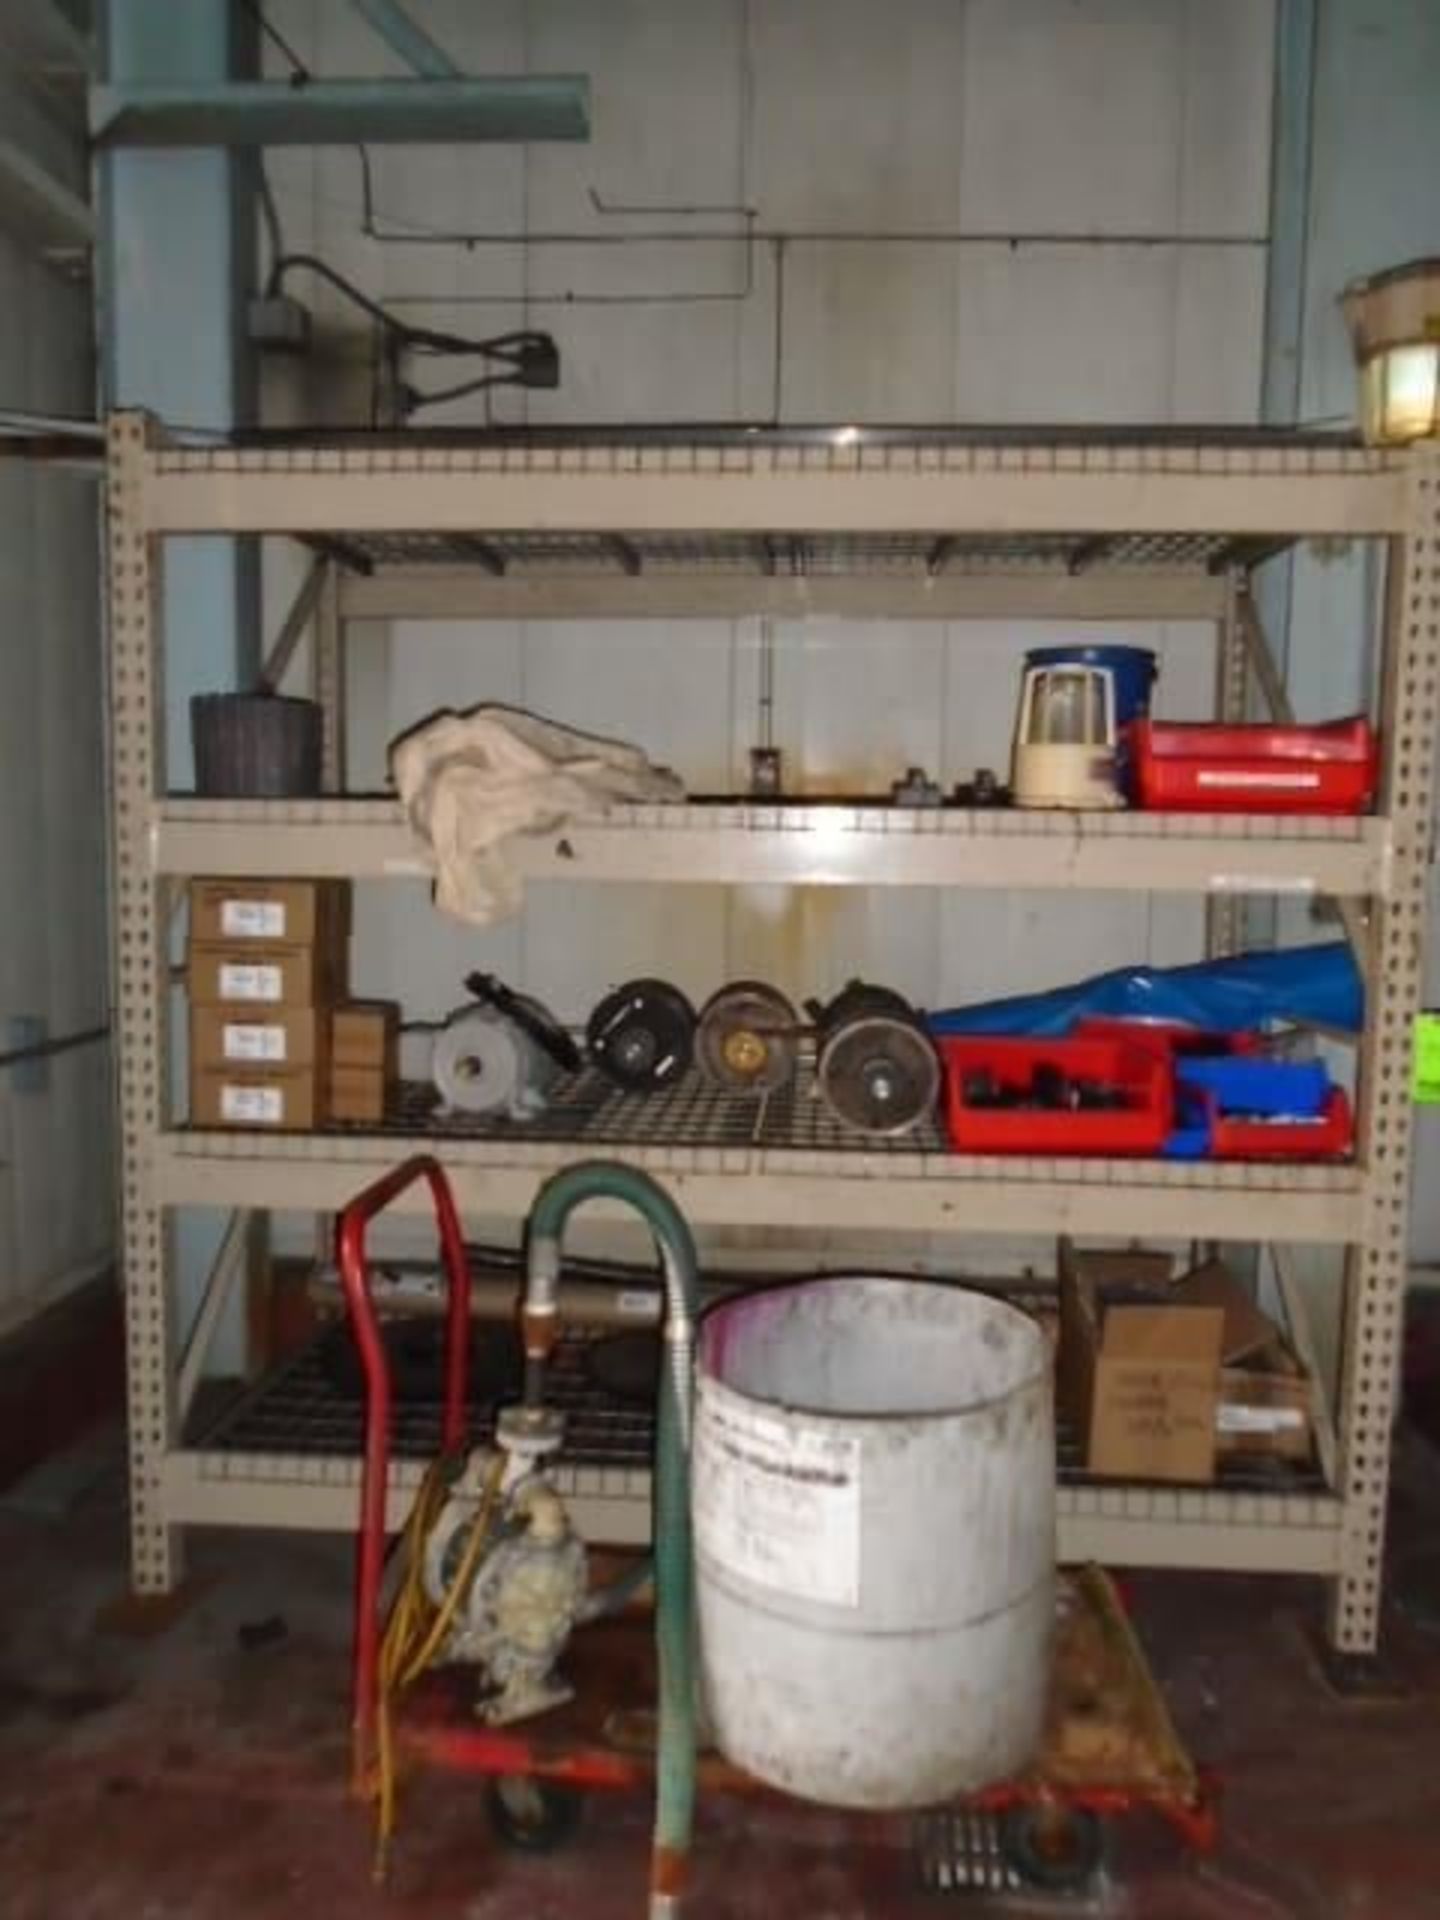 Shelf, Cart and Contents ( Horton Clutch Brackets, Spare Flappers, Assorted Motors, Transfer Pump)